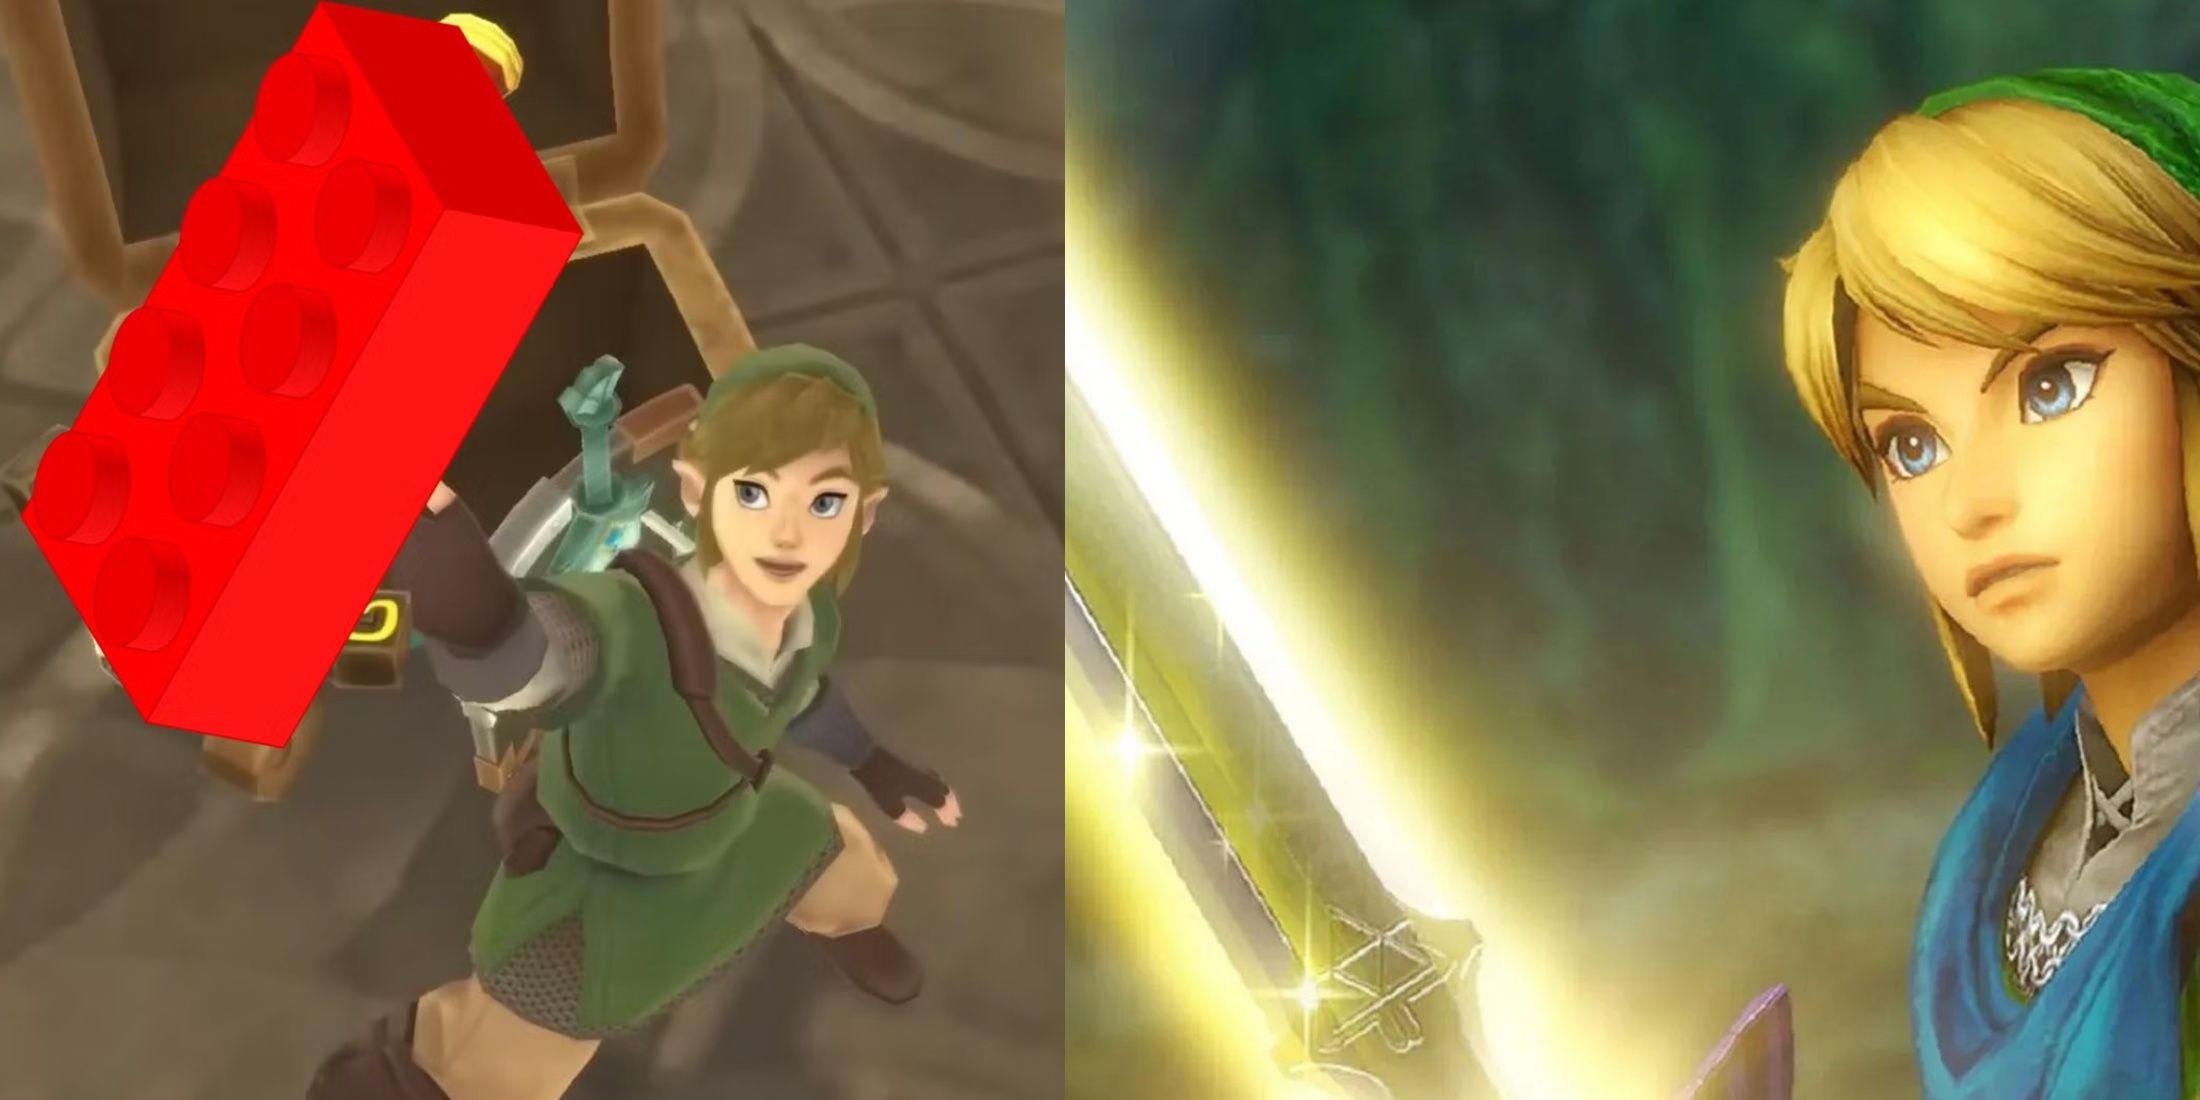 Link holding up a red LEGO Brick next to him holding the Master Sword